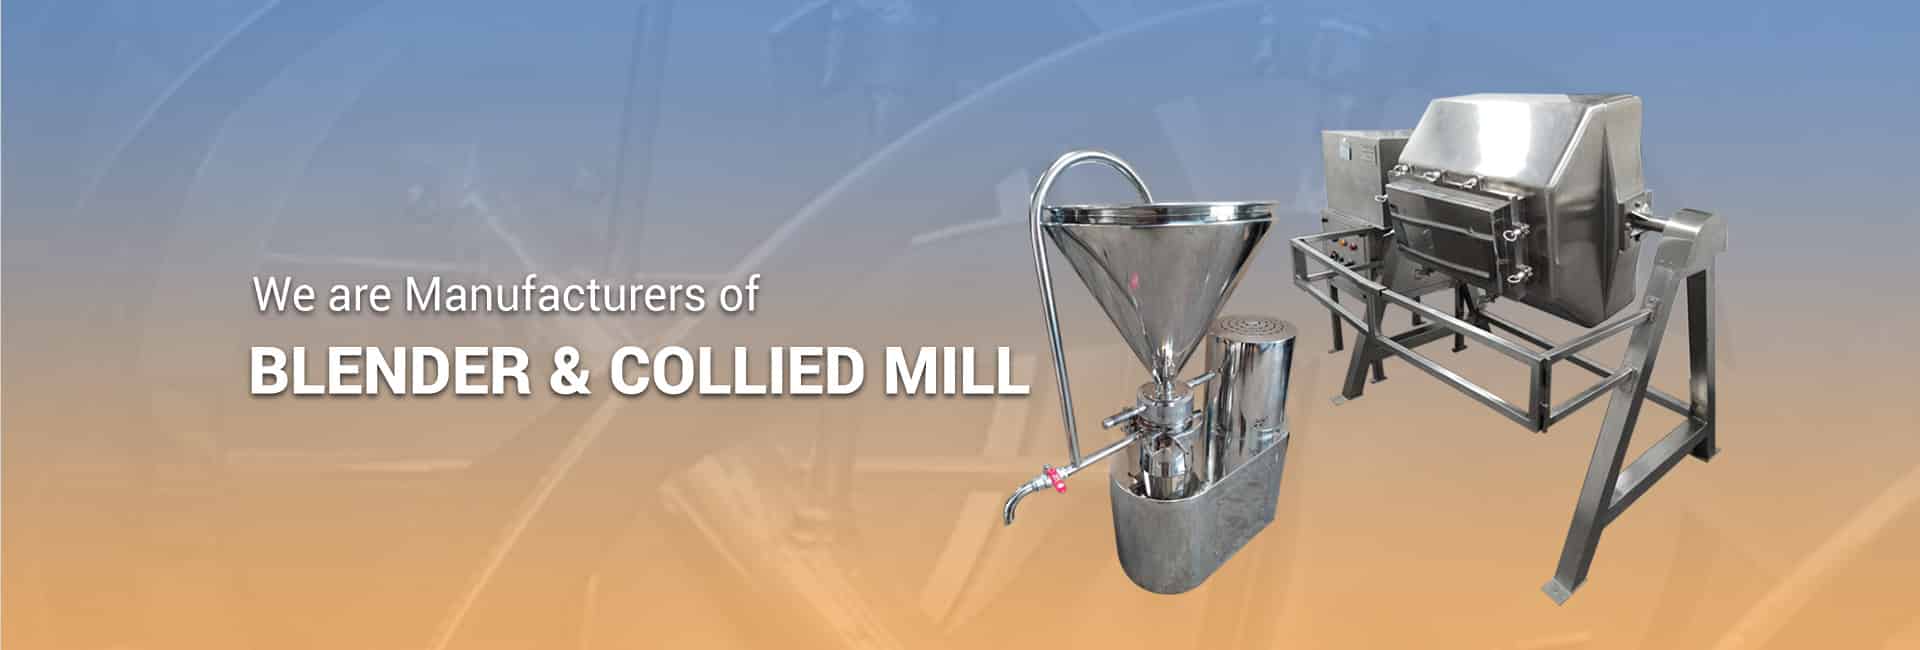 Pharmaceutical Blender Manufacturers in india